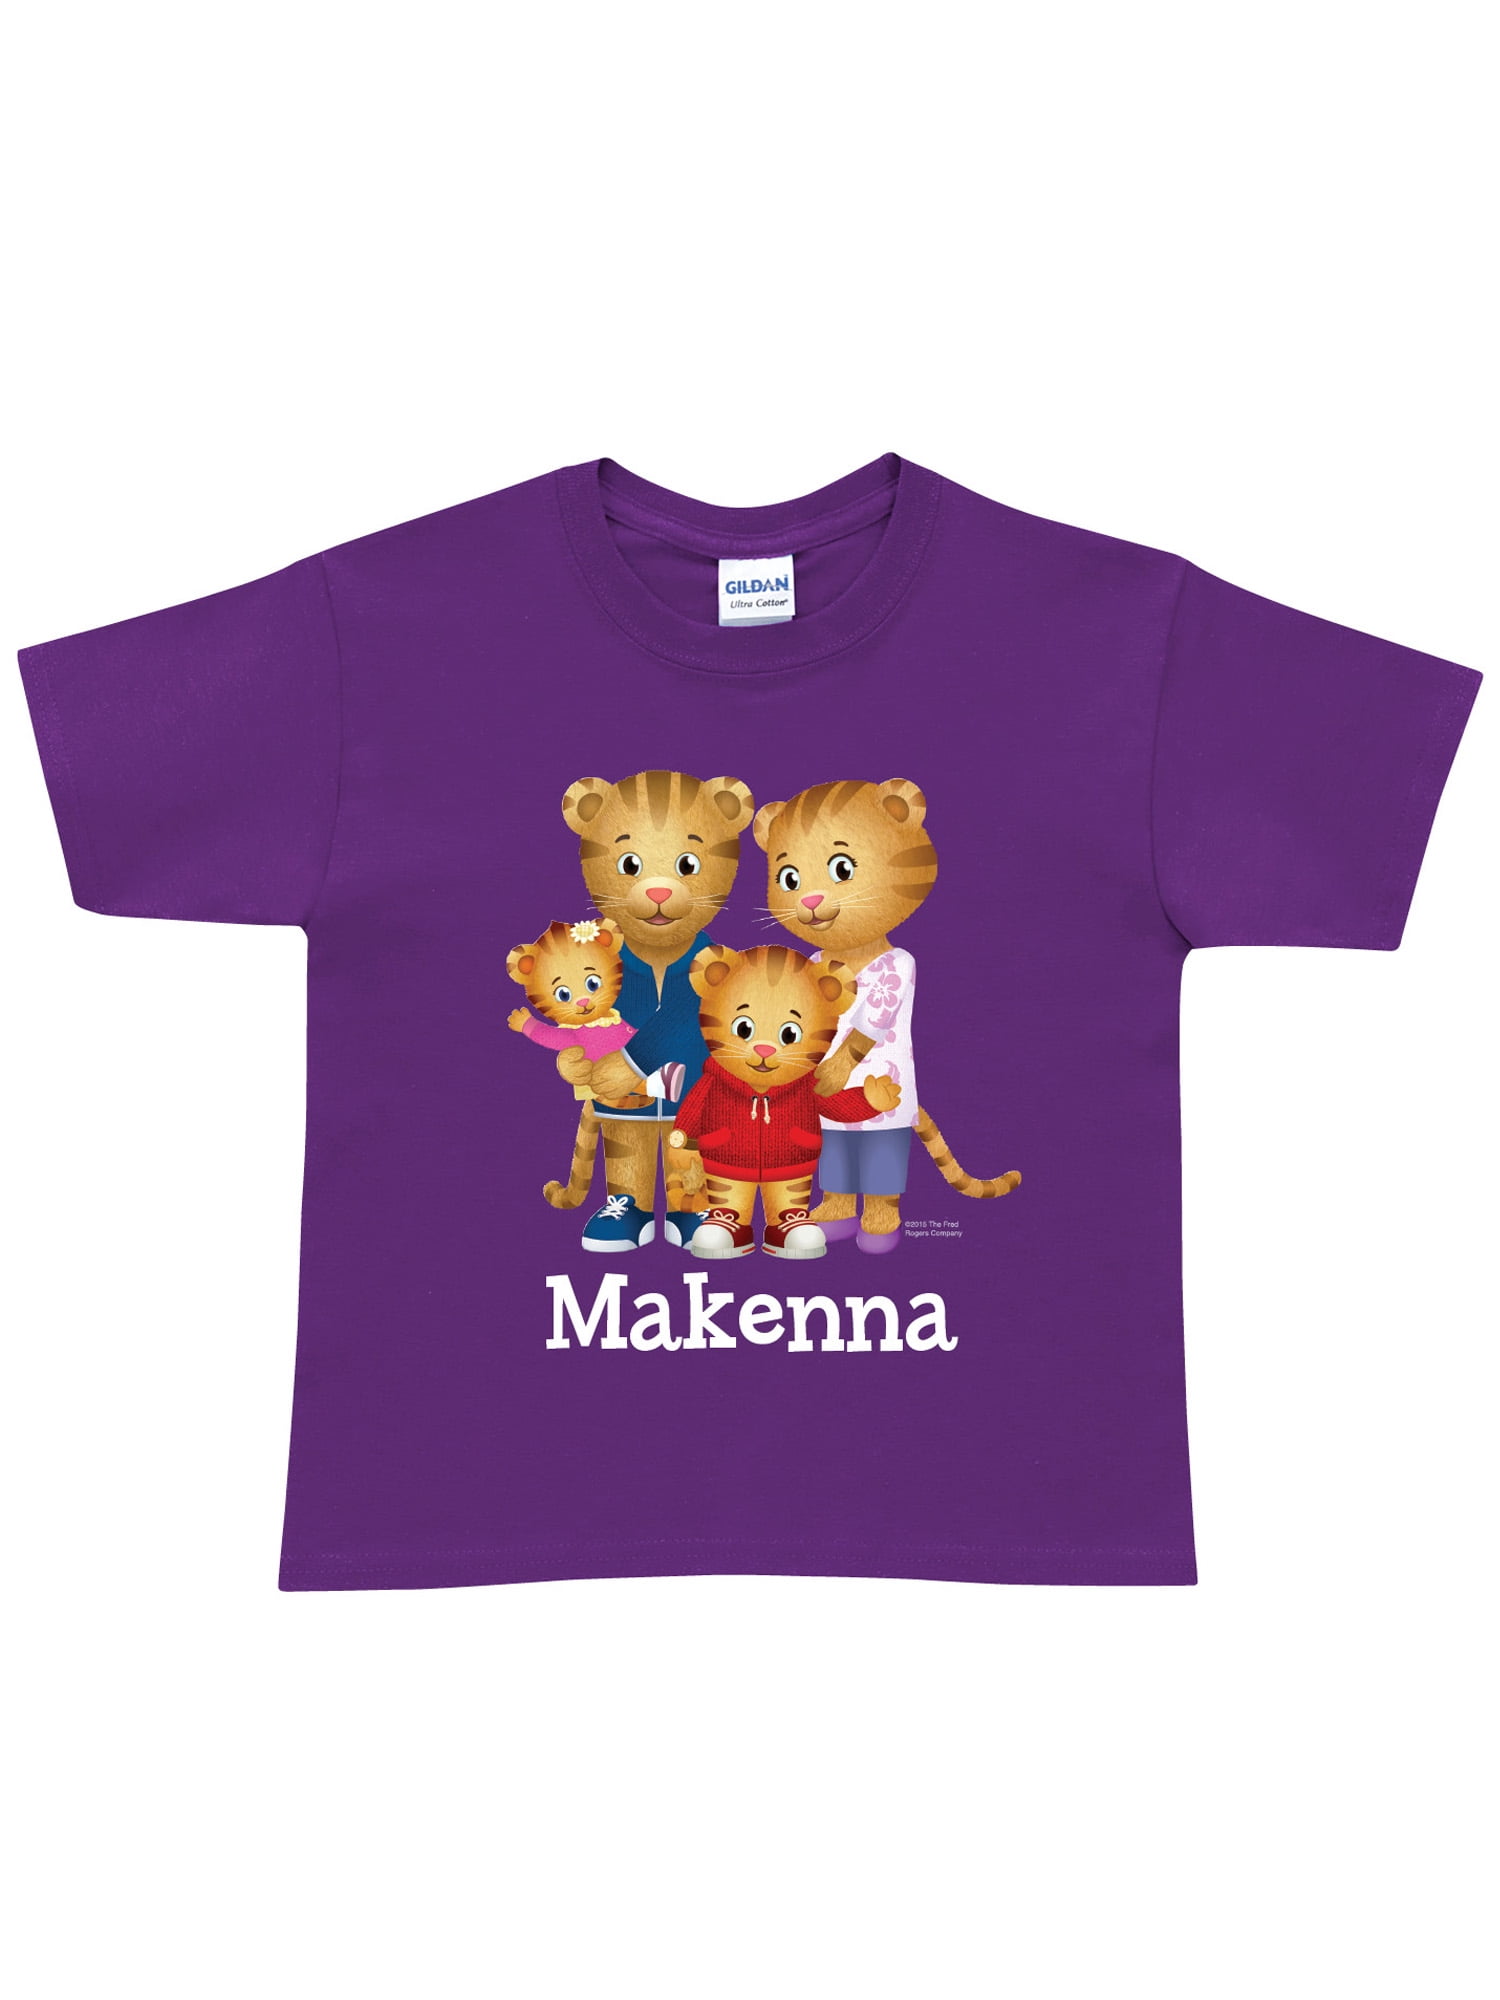 Personalized Tiger\'s T-Shirt Family Daniel Tiger Toddler Neighborhood Purple